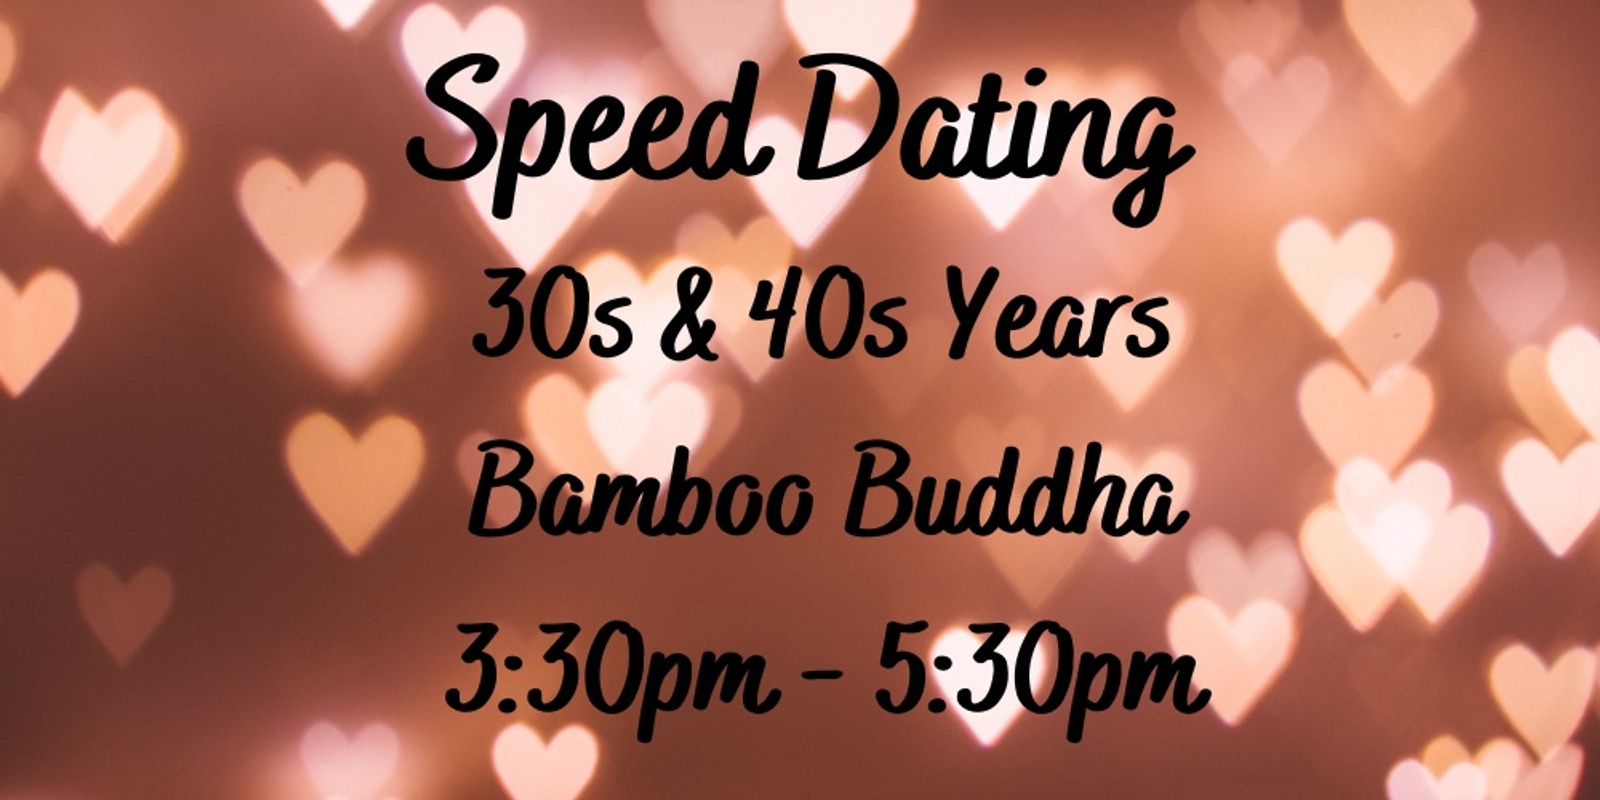 Banner image for 30s & 40s years Speed Dating 